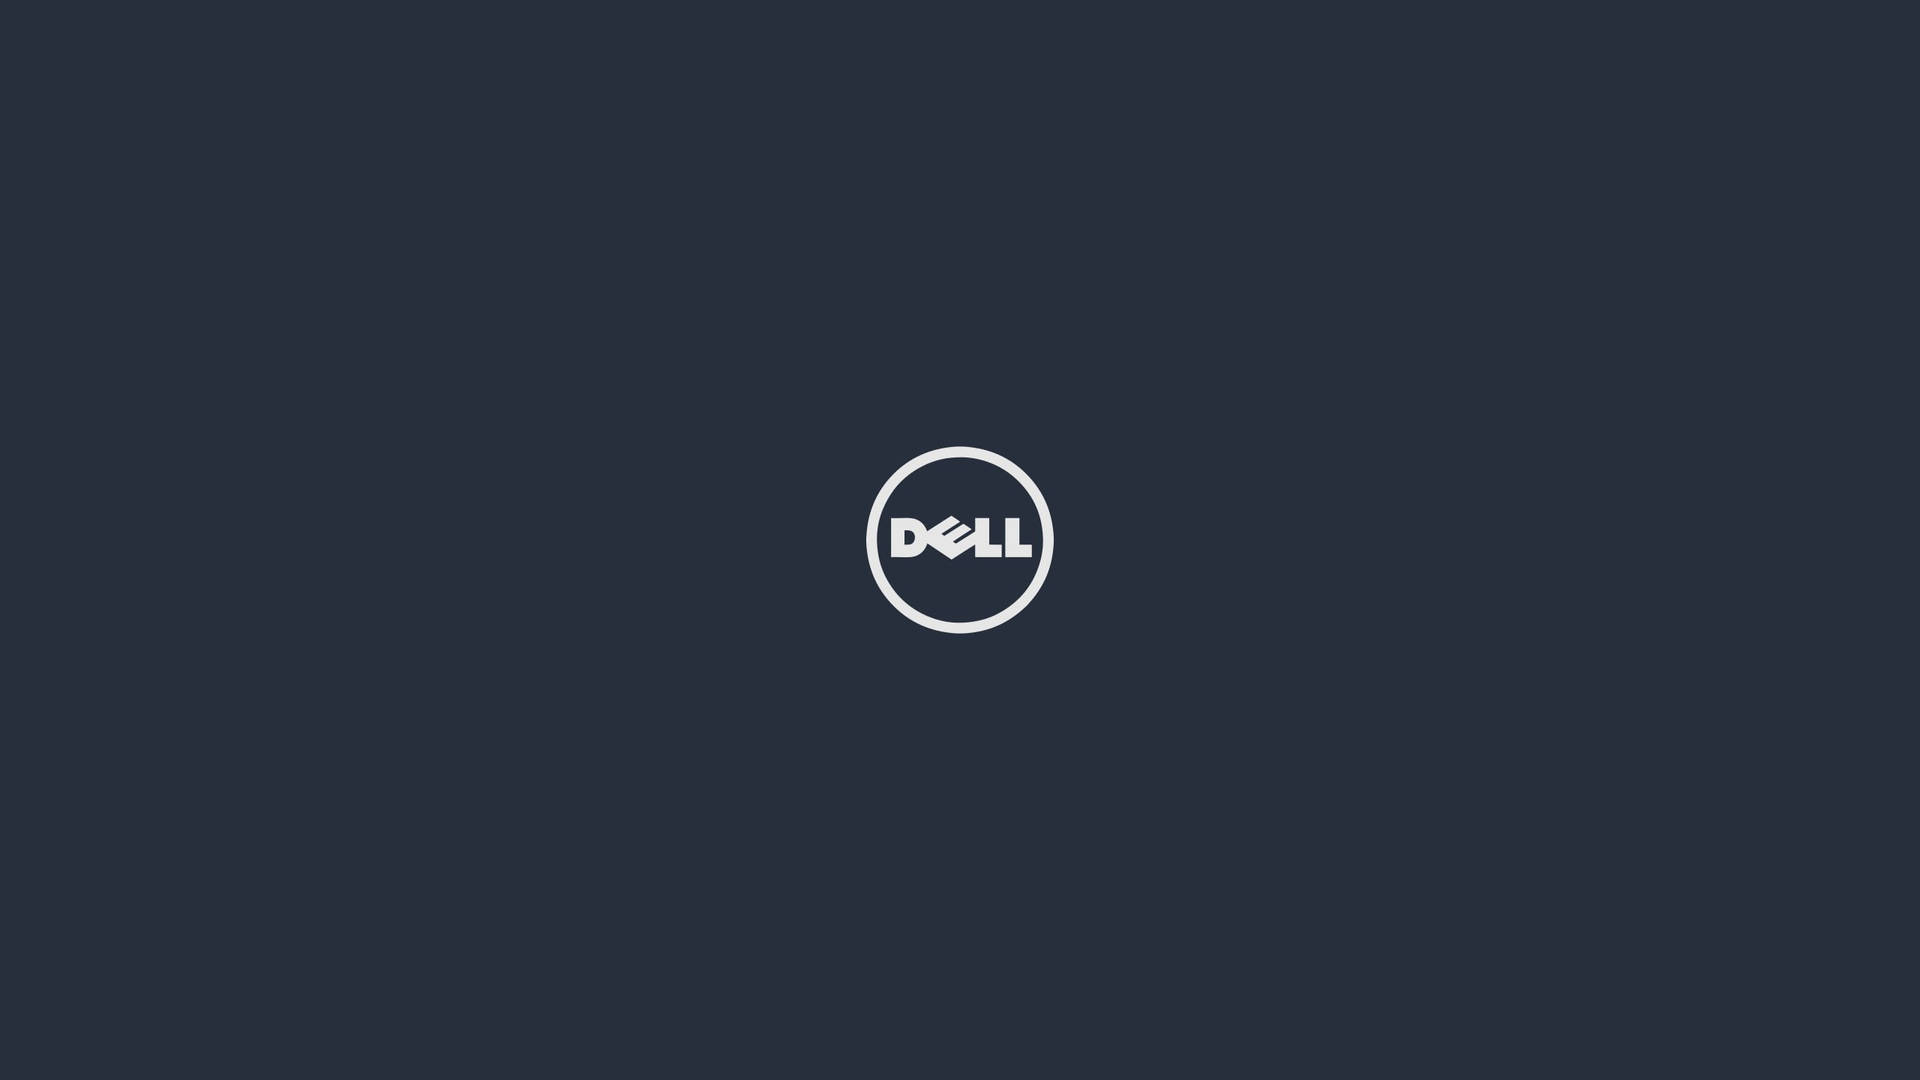 Simple Blue Gray Dell Laptop Logo Background